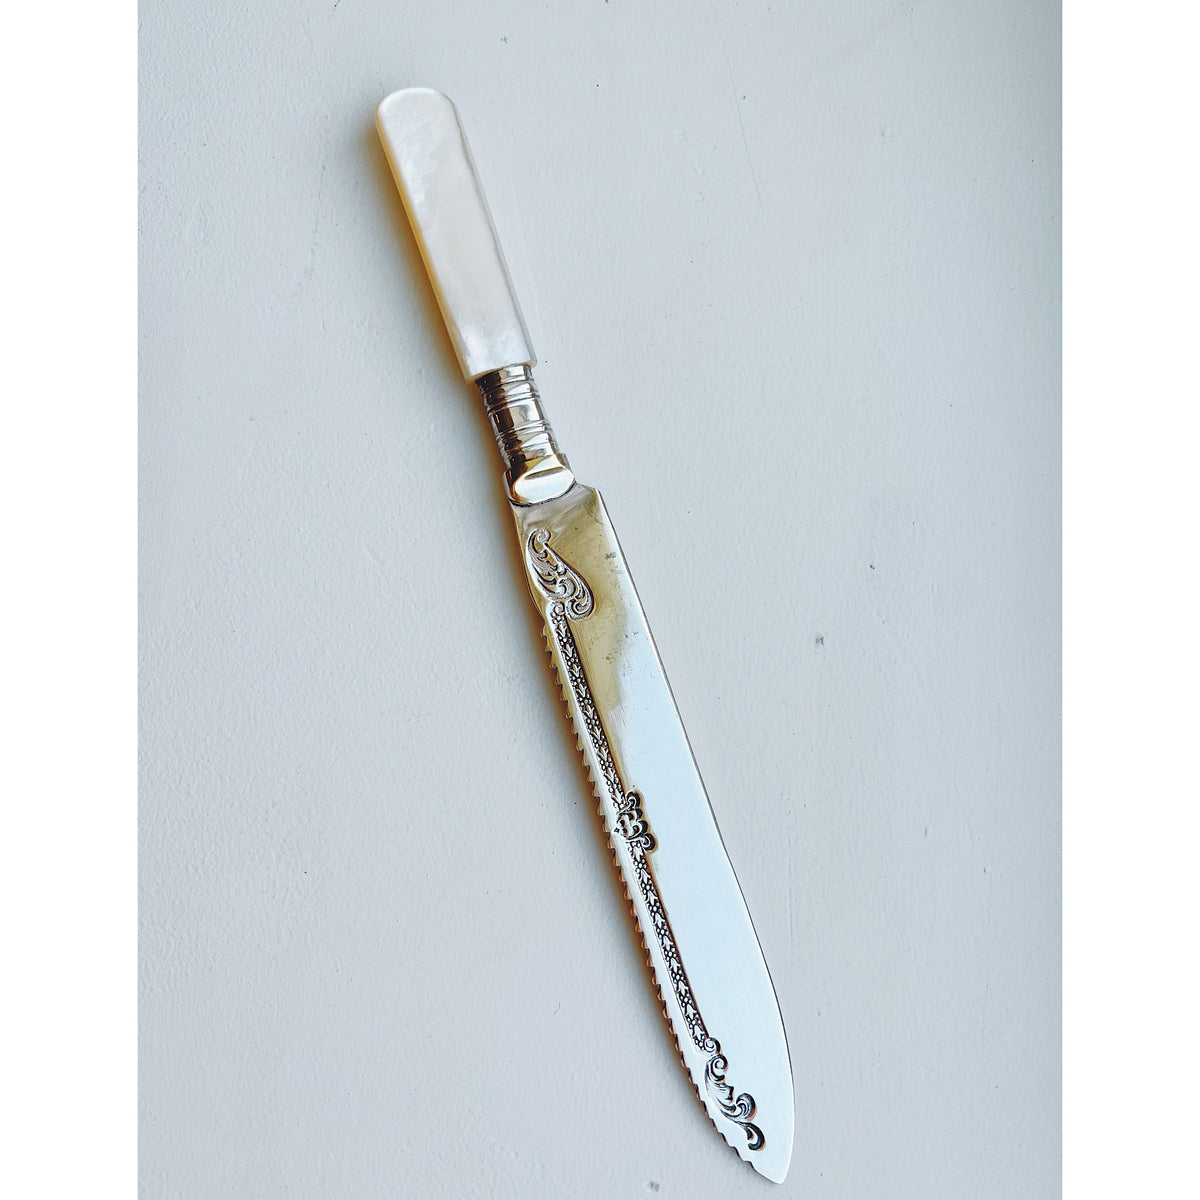 Antique Silver Plate Cake Knife with Mother of Pearl Handle